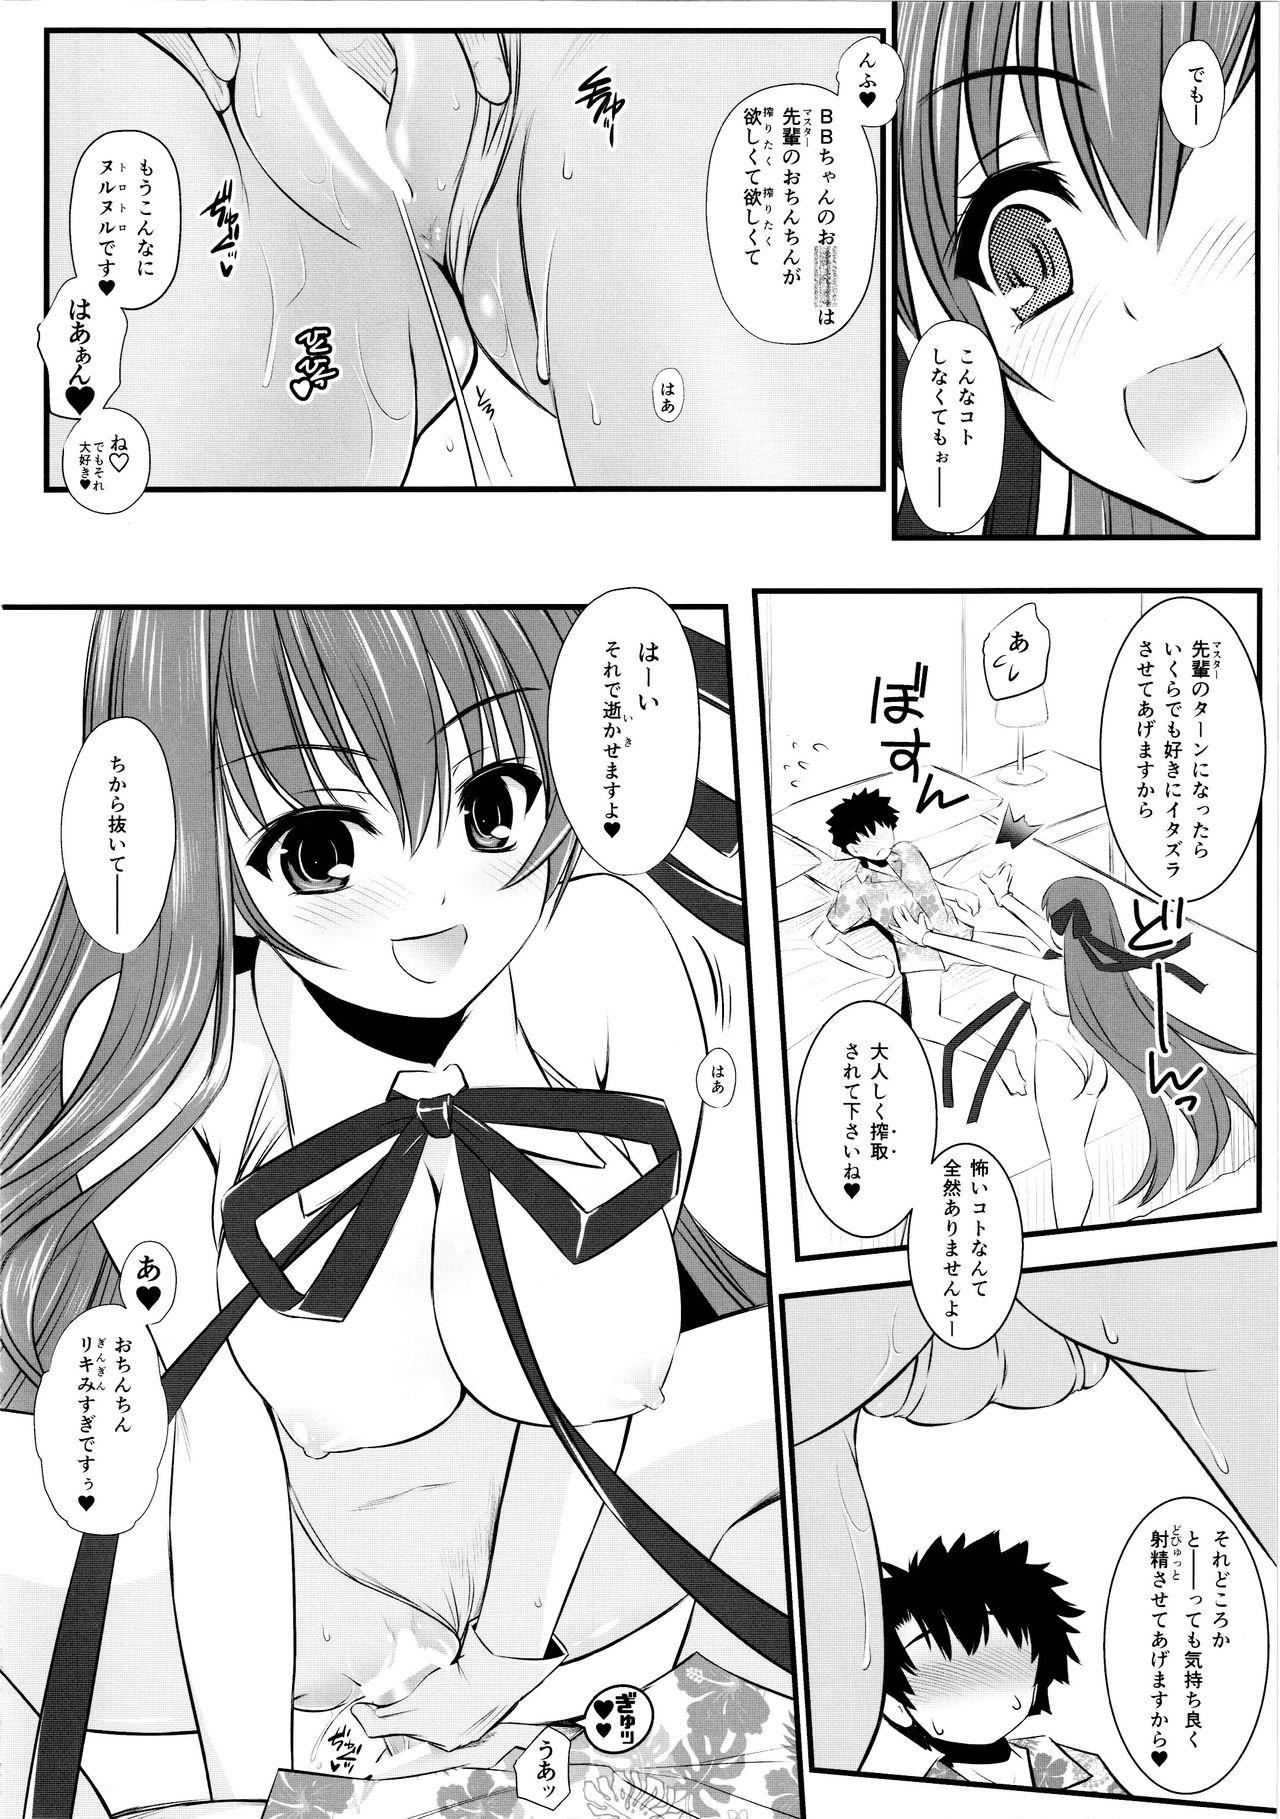 Real Amateurs (C96) [Yakan Honpo (Inoue Tommy)] Queen [Kyuuin] BB-chan (Fate/Grand Order) - Fate grand order Cuminmouth - Page 8